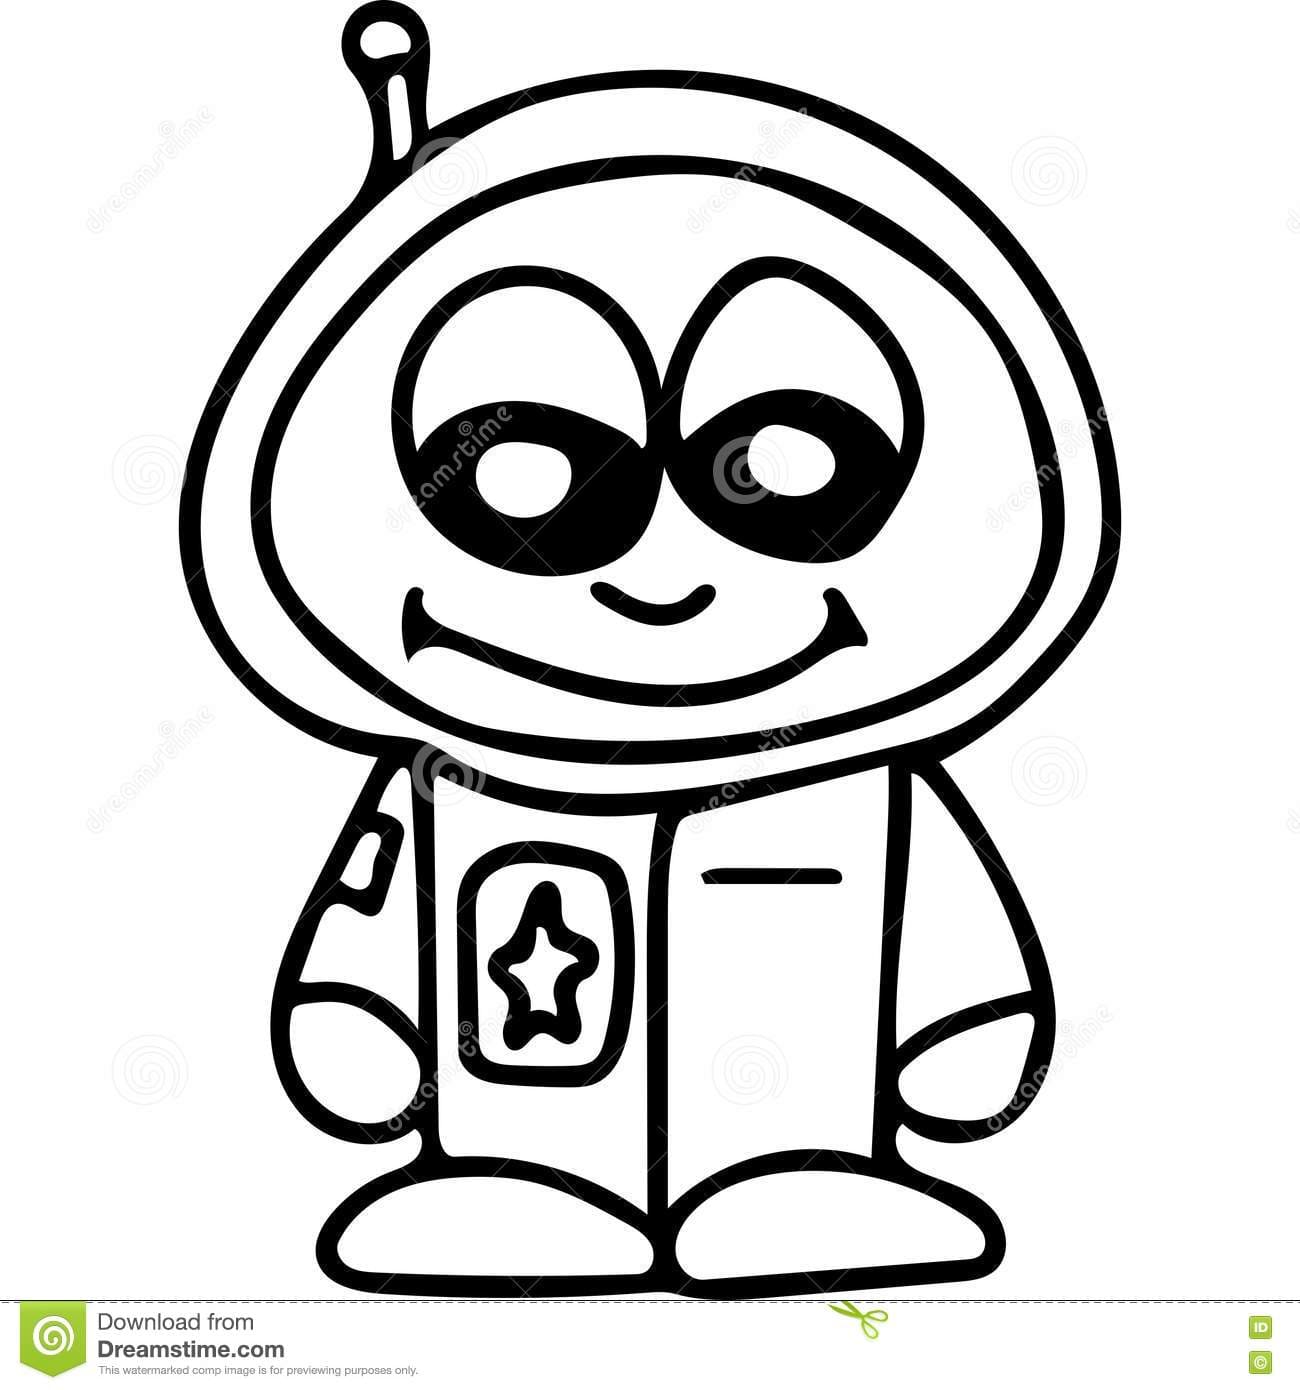 Astronaut kids coloring page Coloring Page